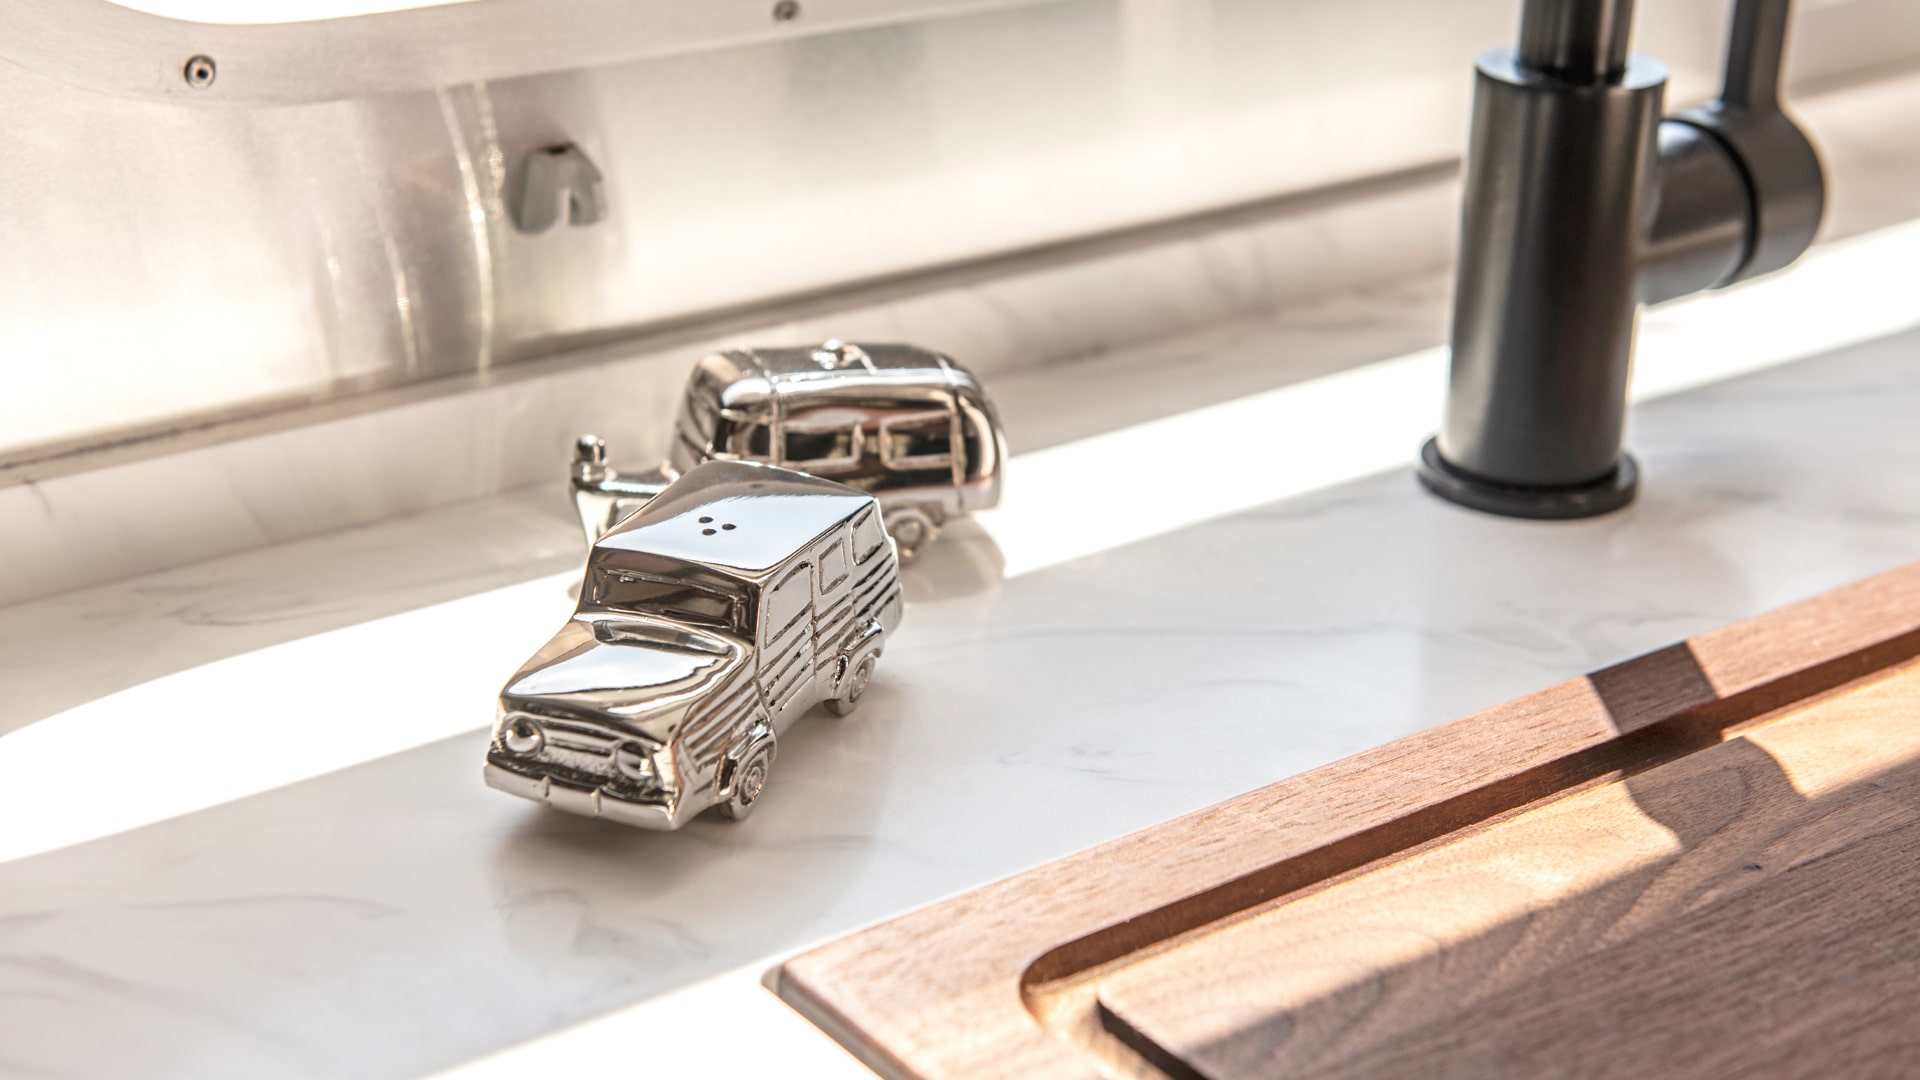 Airstream-X-Pottery-Barn-Interior-Salt-and-Pepper-Shakers-min